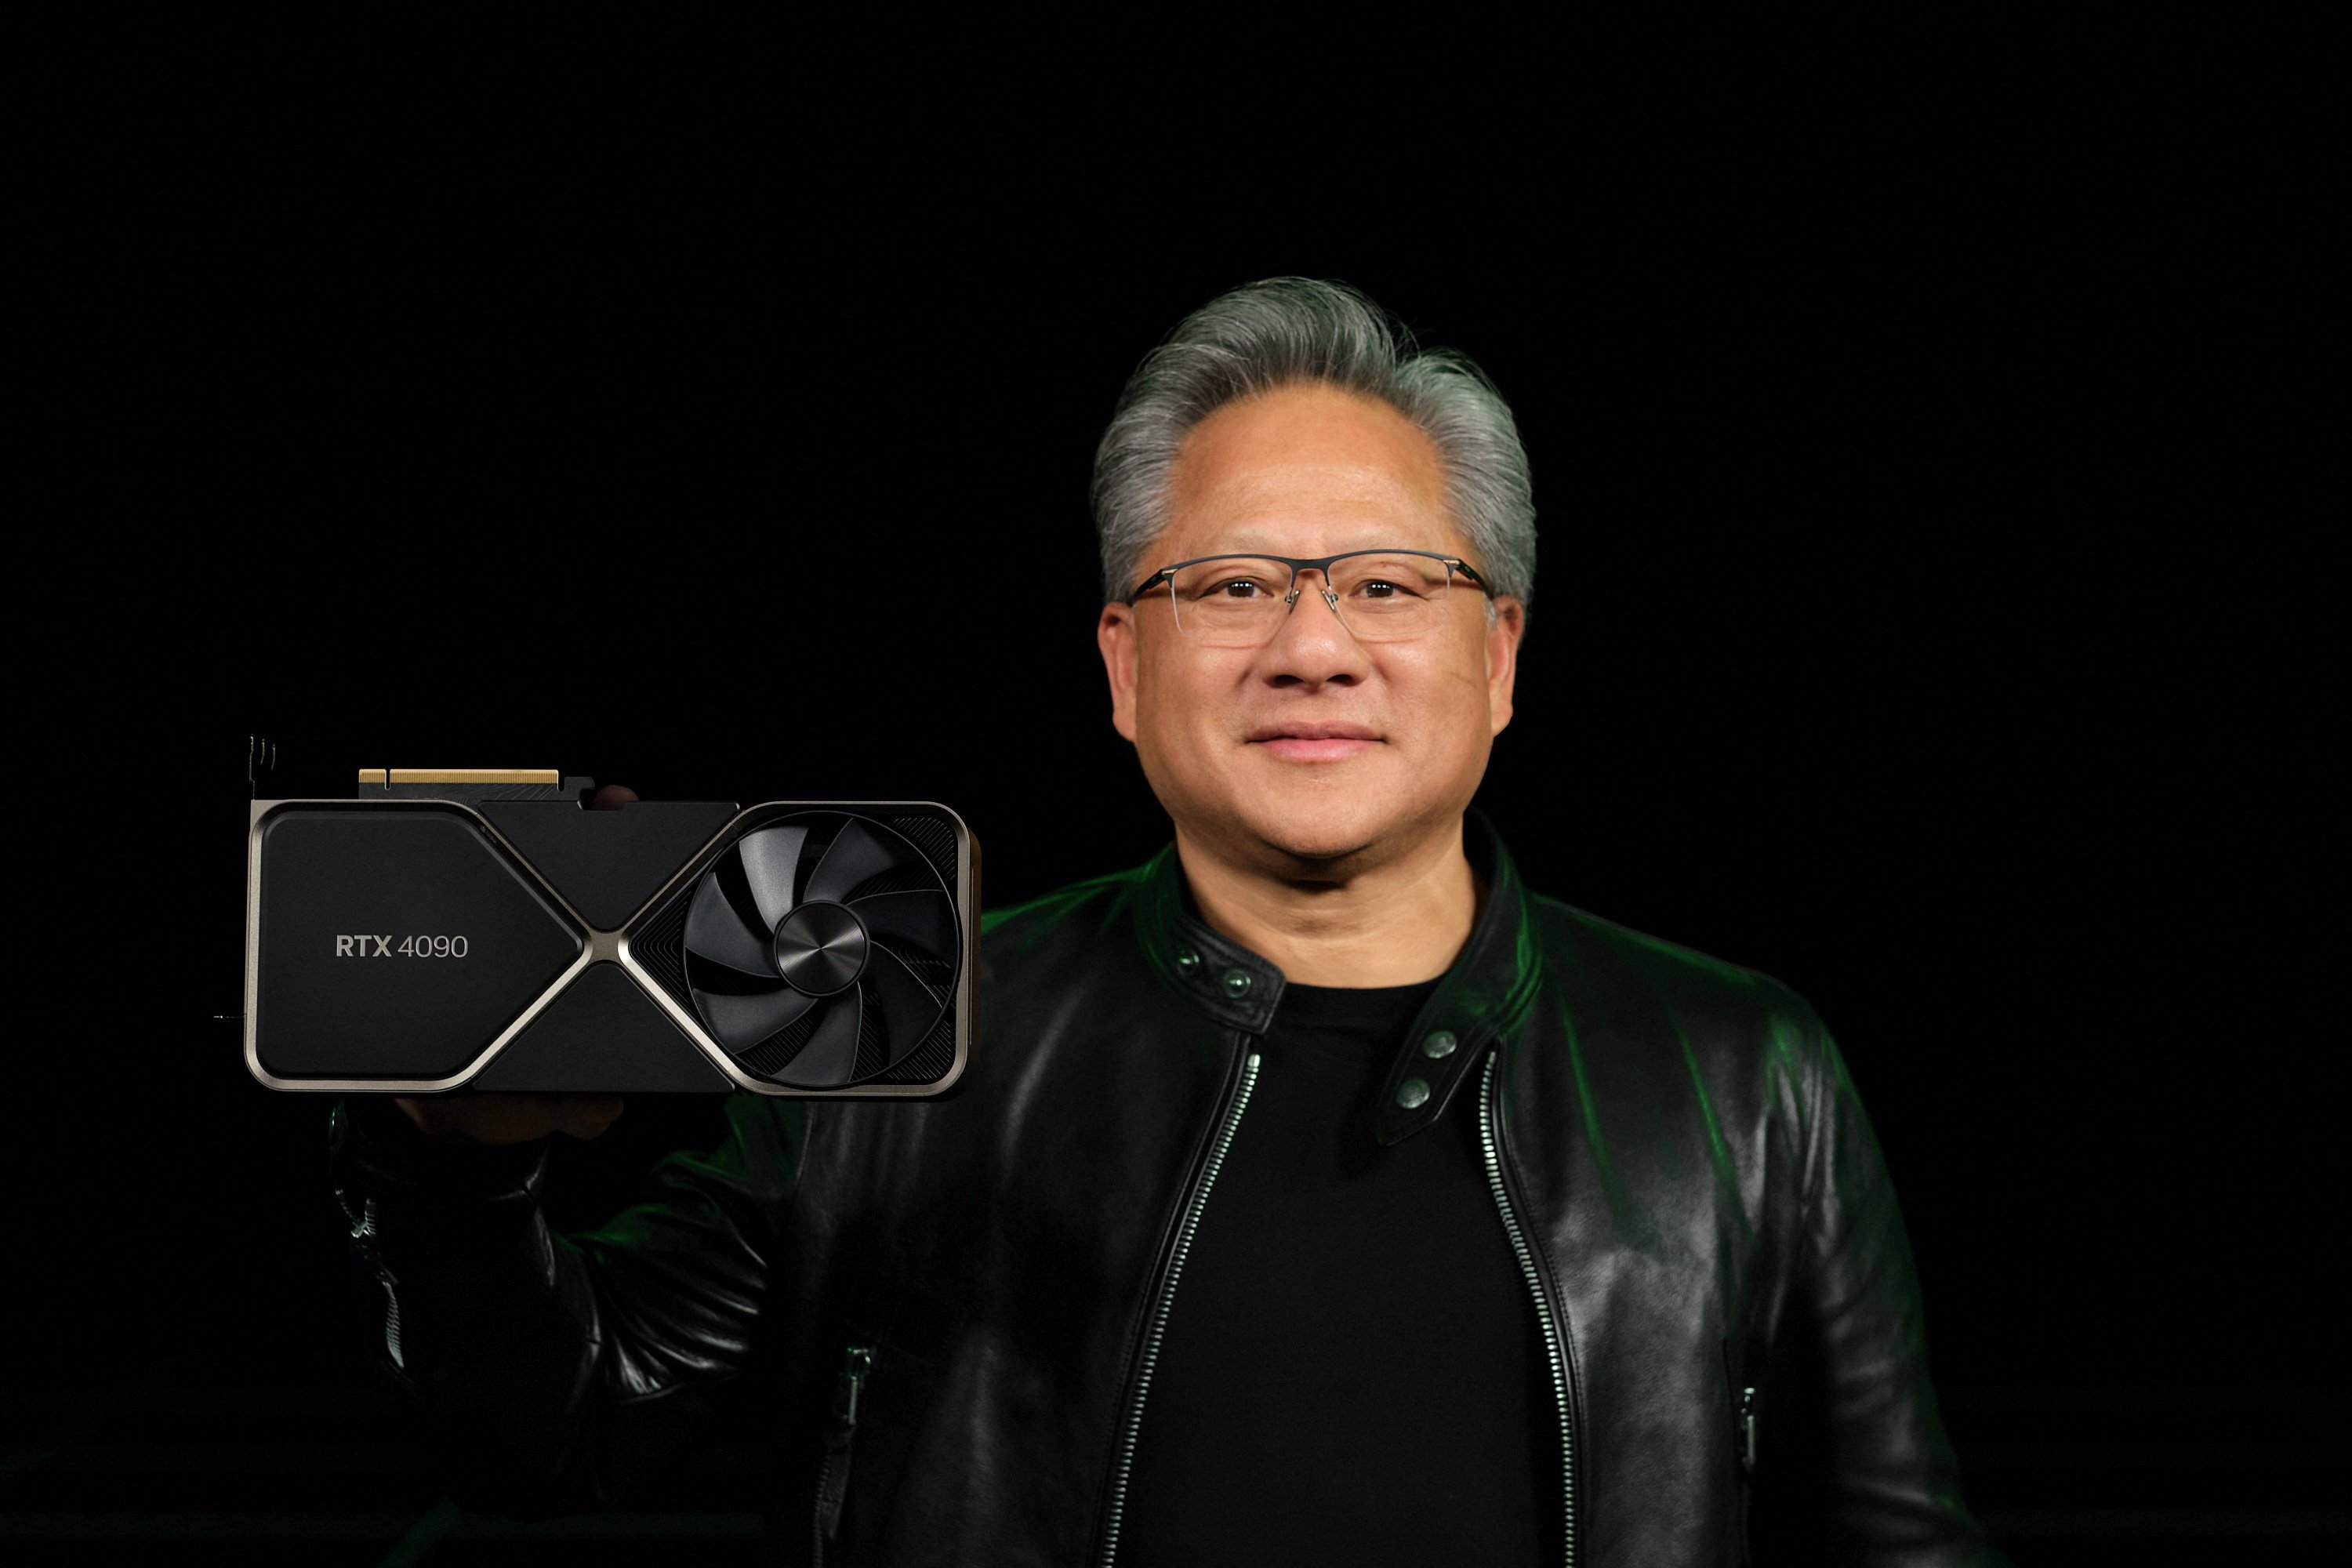 Nvidia Corp CEO Jensen Huang has returned to US after Taiwan trip, according to media reports. Photo: Reuters  